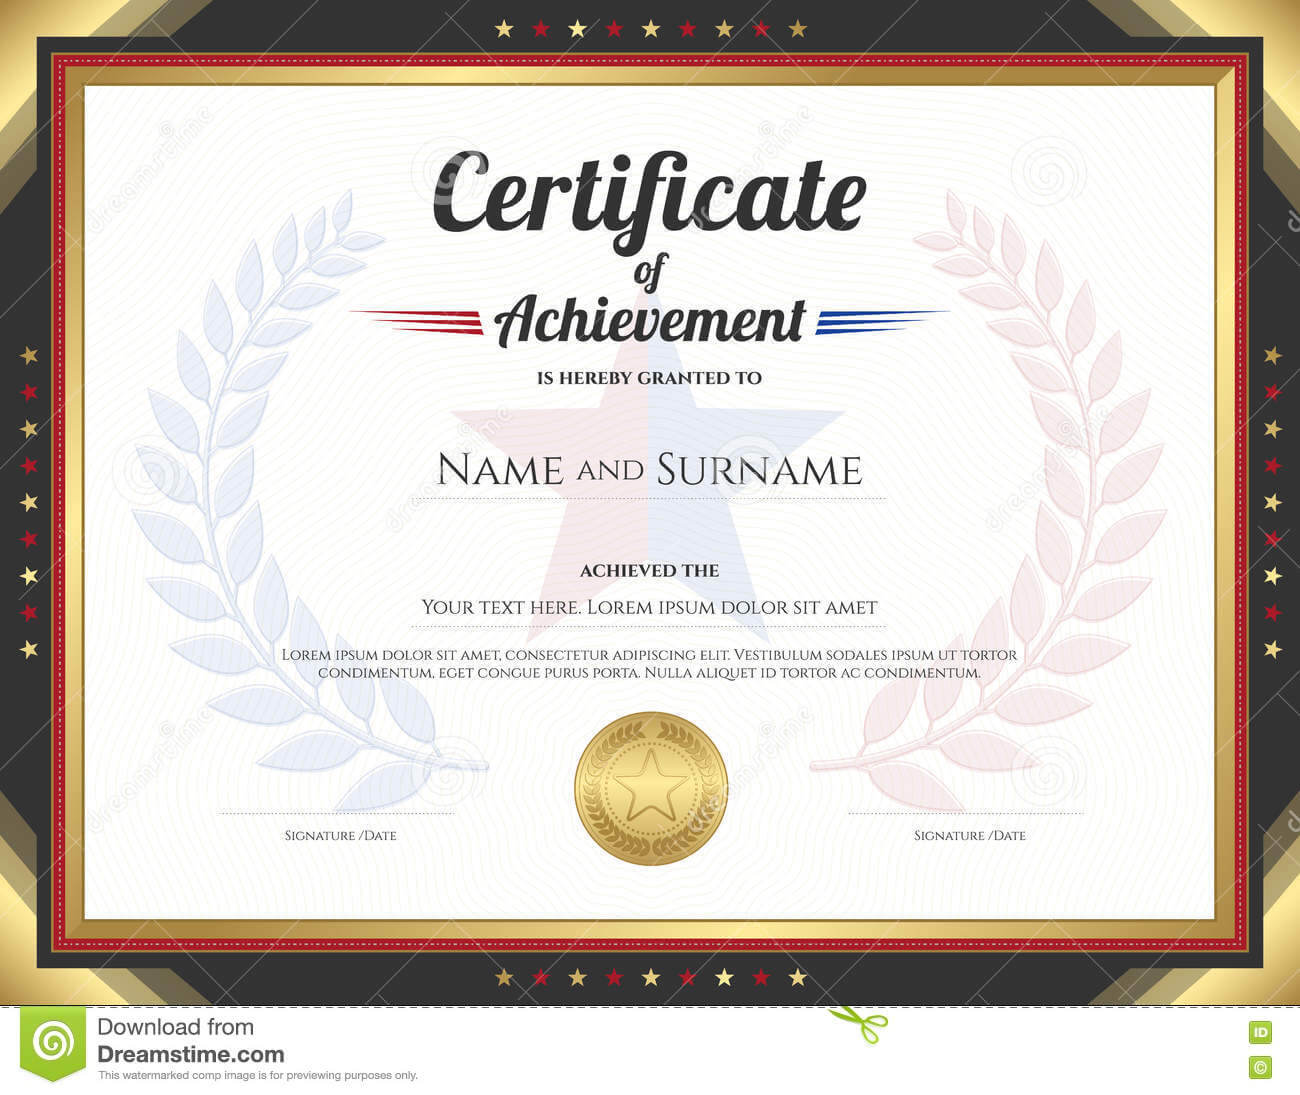 Certificate Of Achievement Template With Gold Border Theme For Star Naming Certificate Template